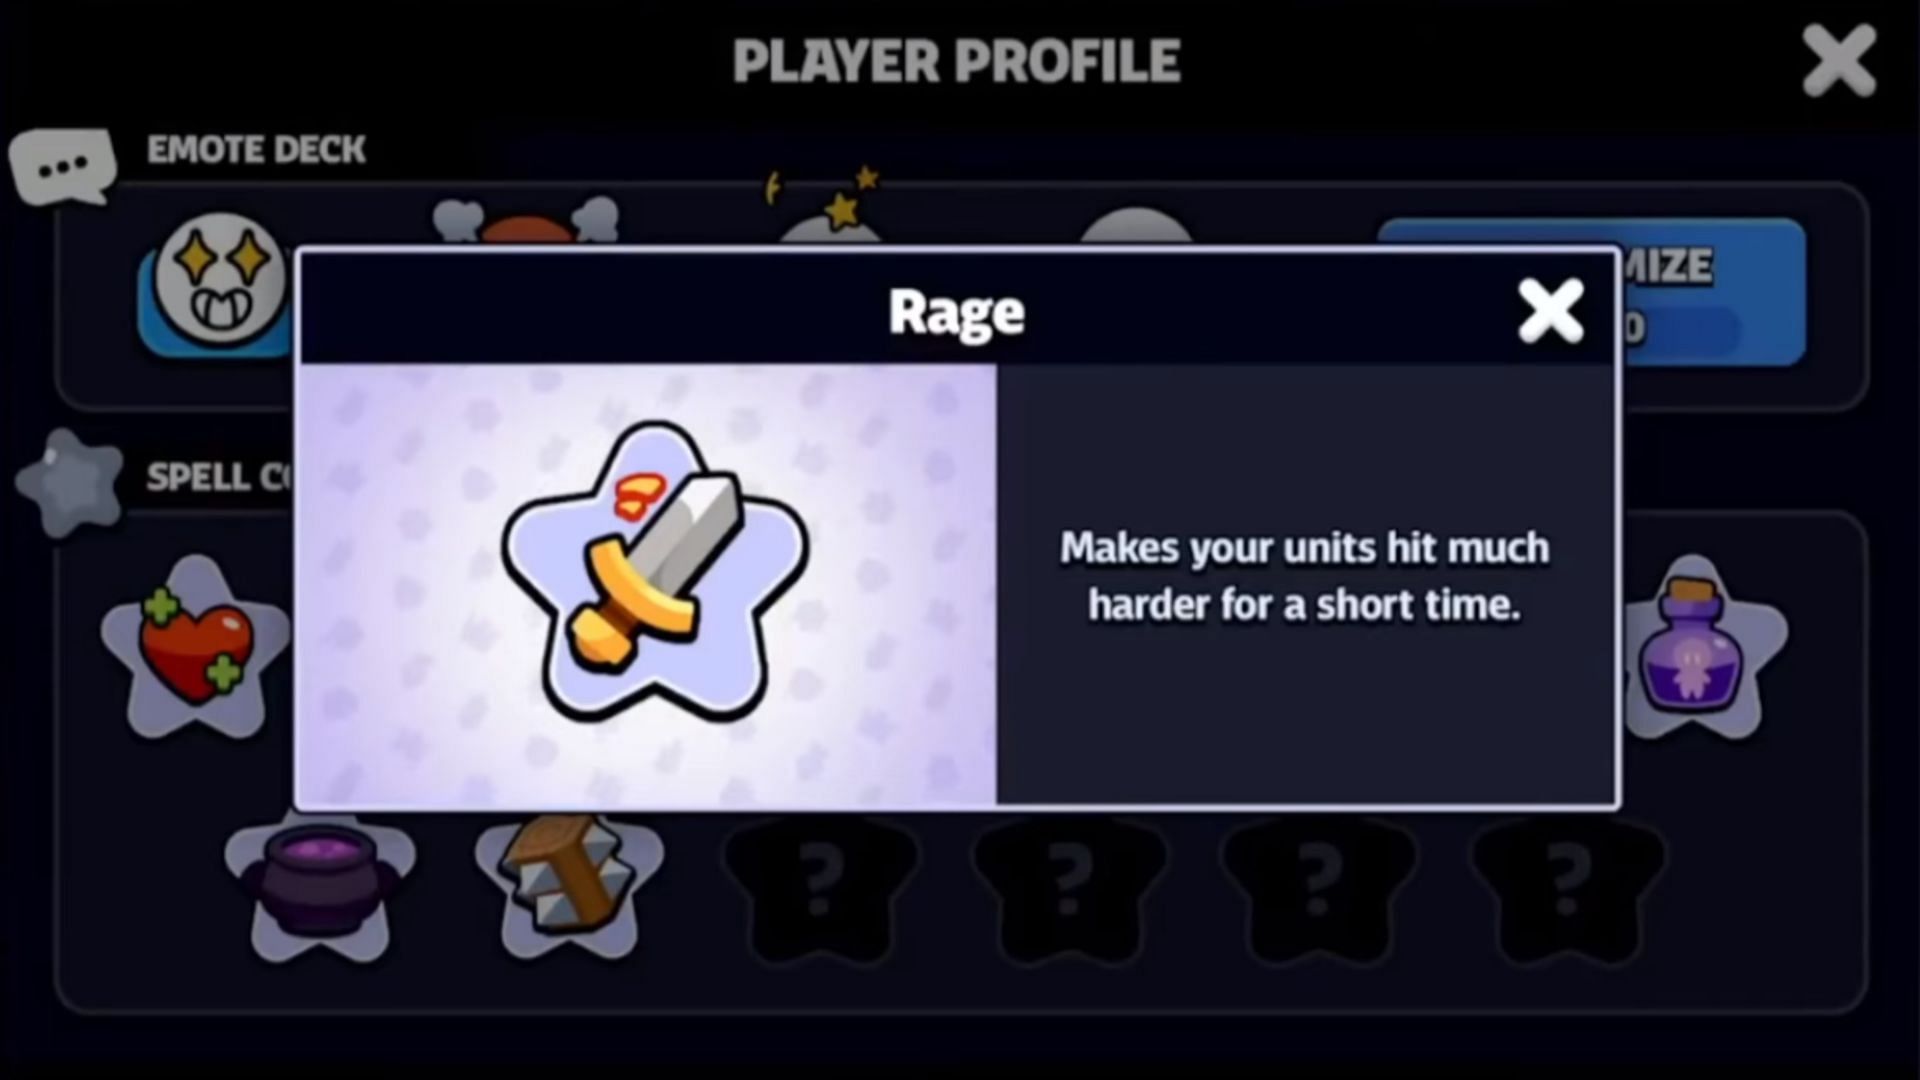 Rage Spell (Image via Supercell)